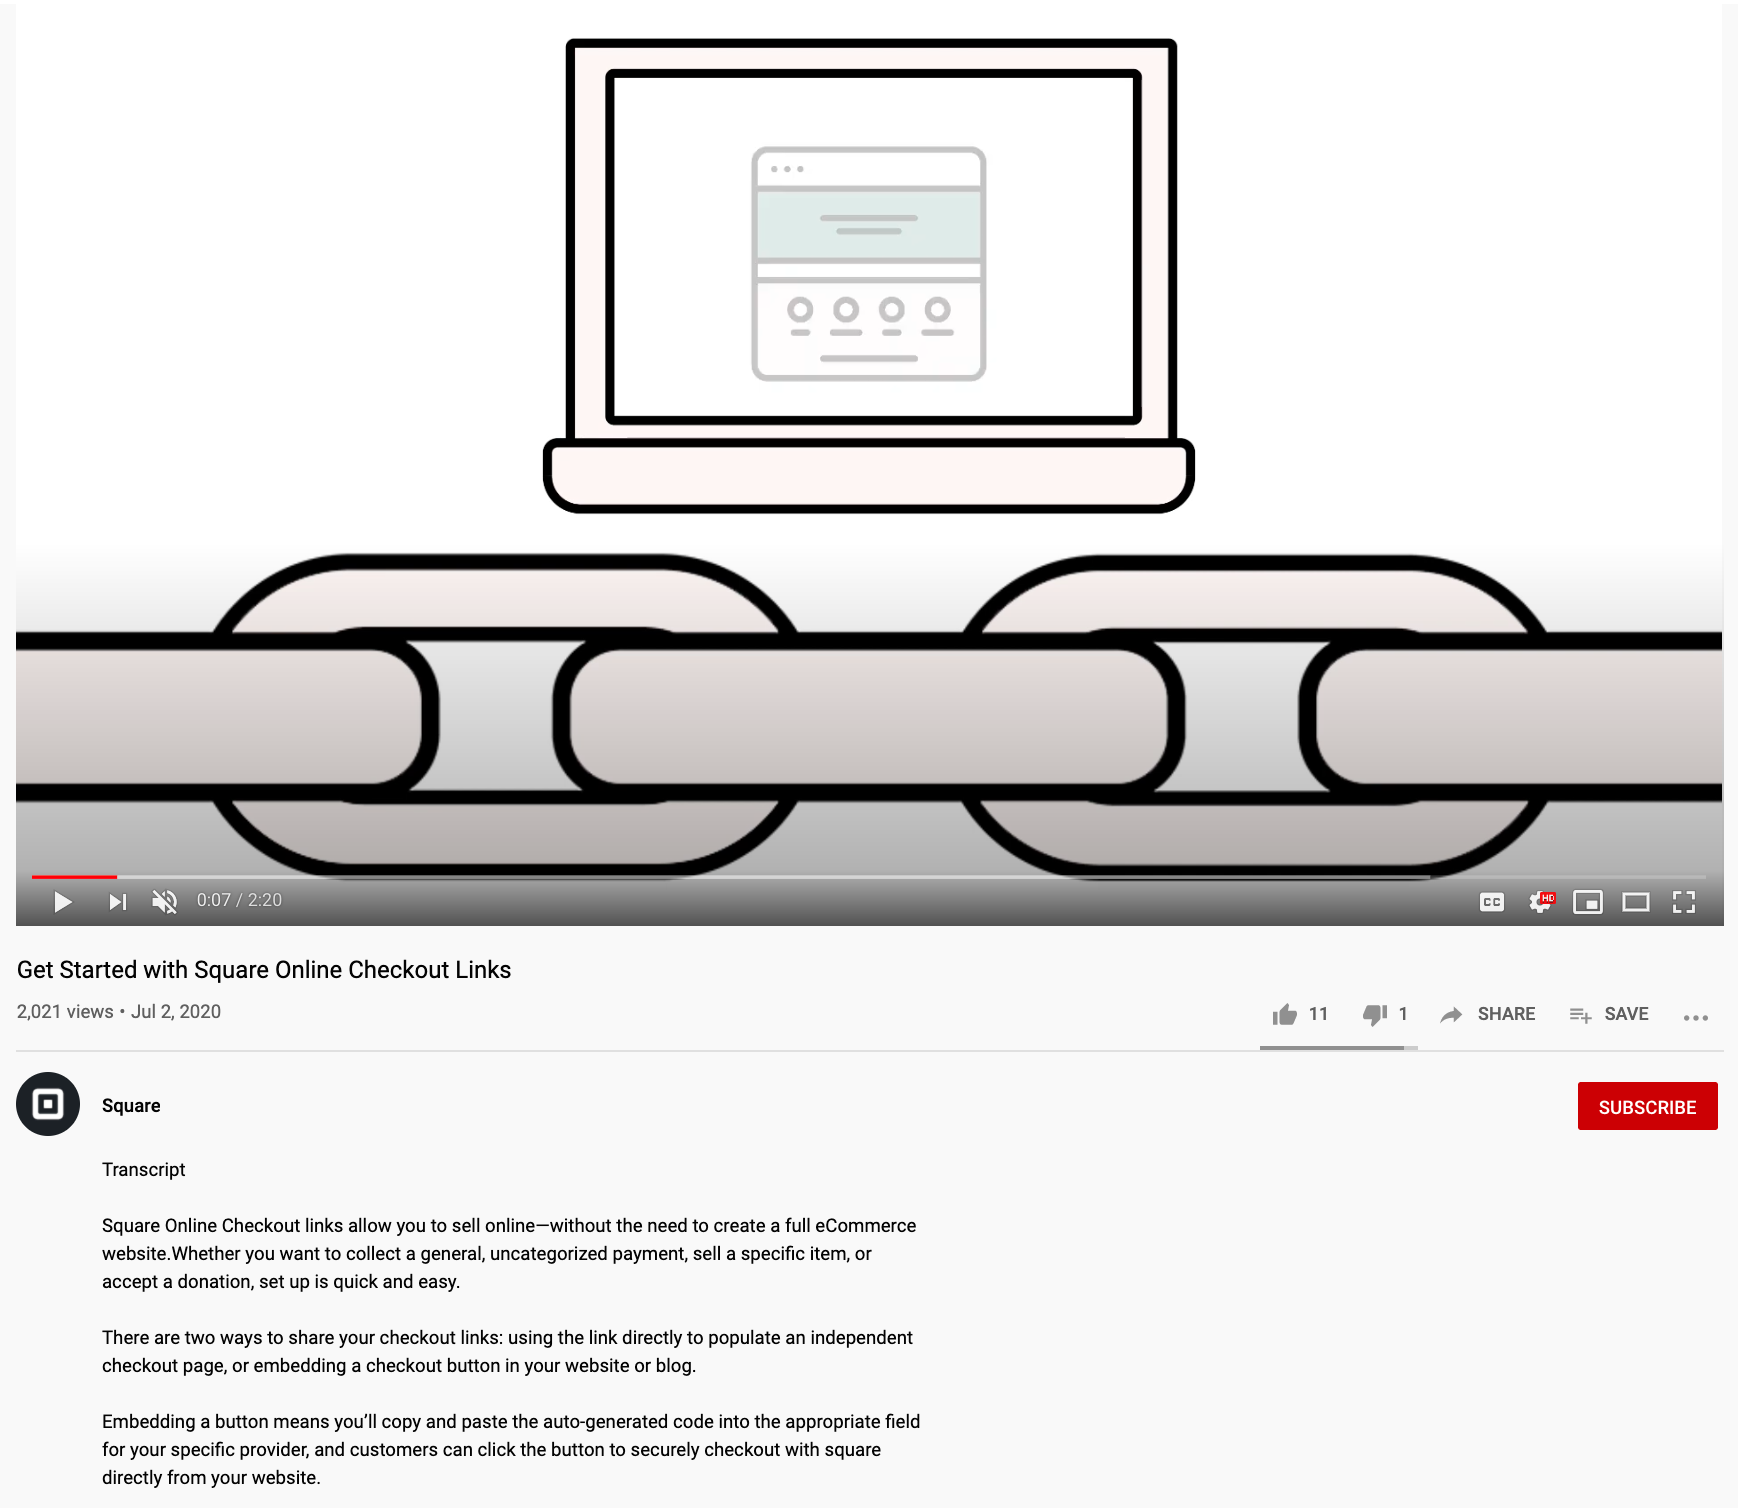 Screenshot of a Square YouTube video with transcription included in the desrciption